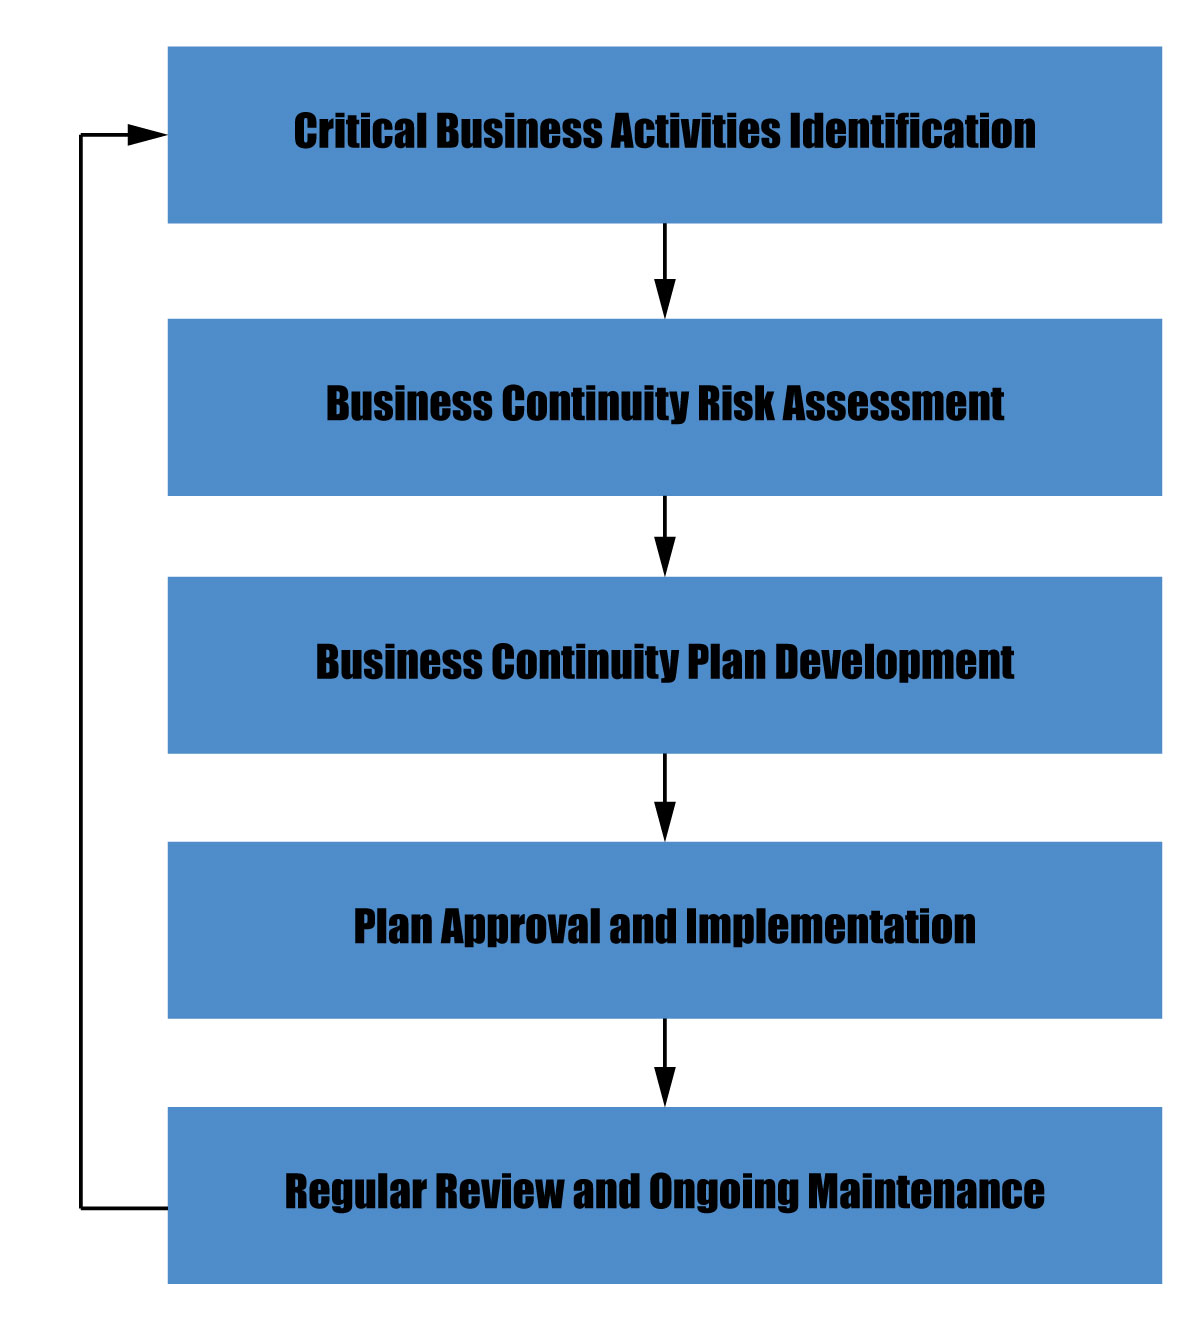 Major Processes of Business Continuity Planning